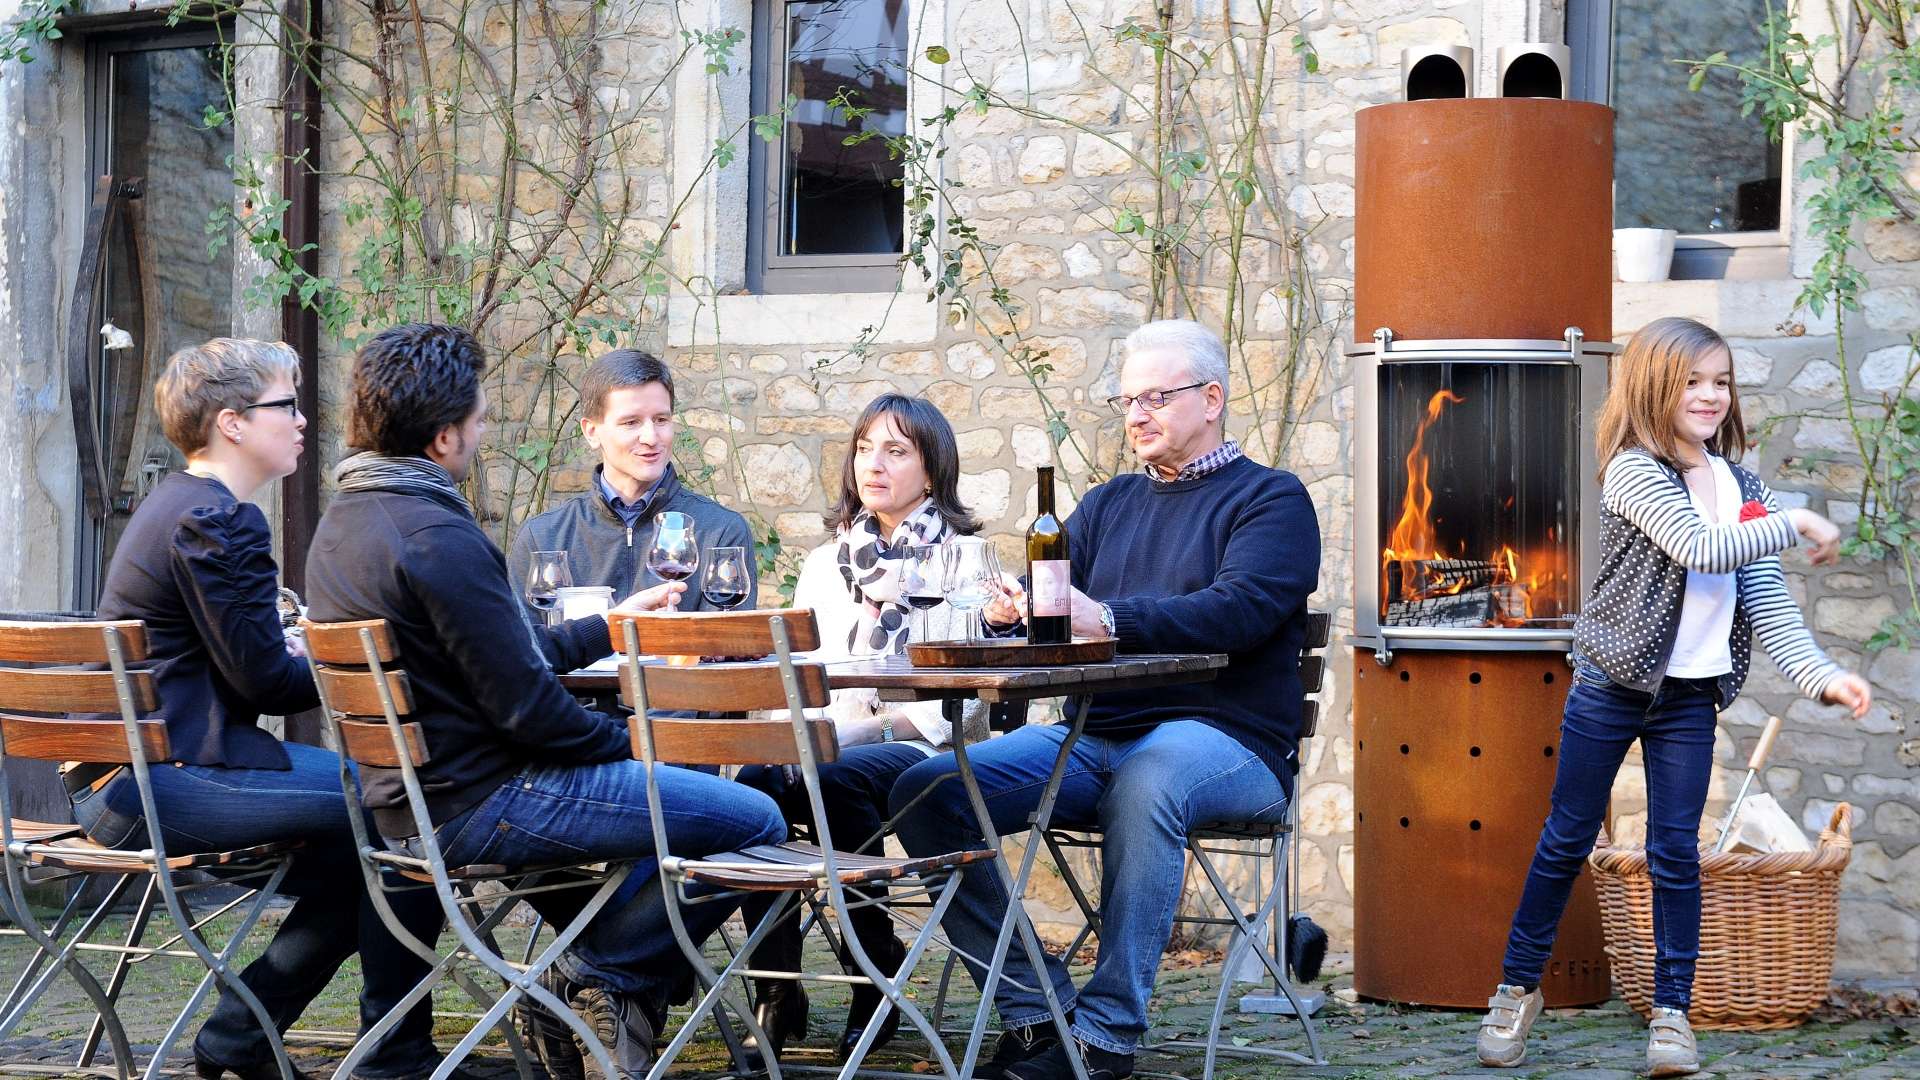 Family seated at an outdoor table with fireplace